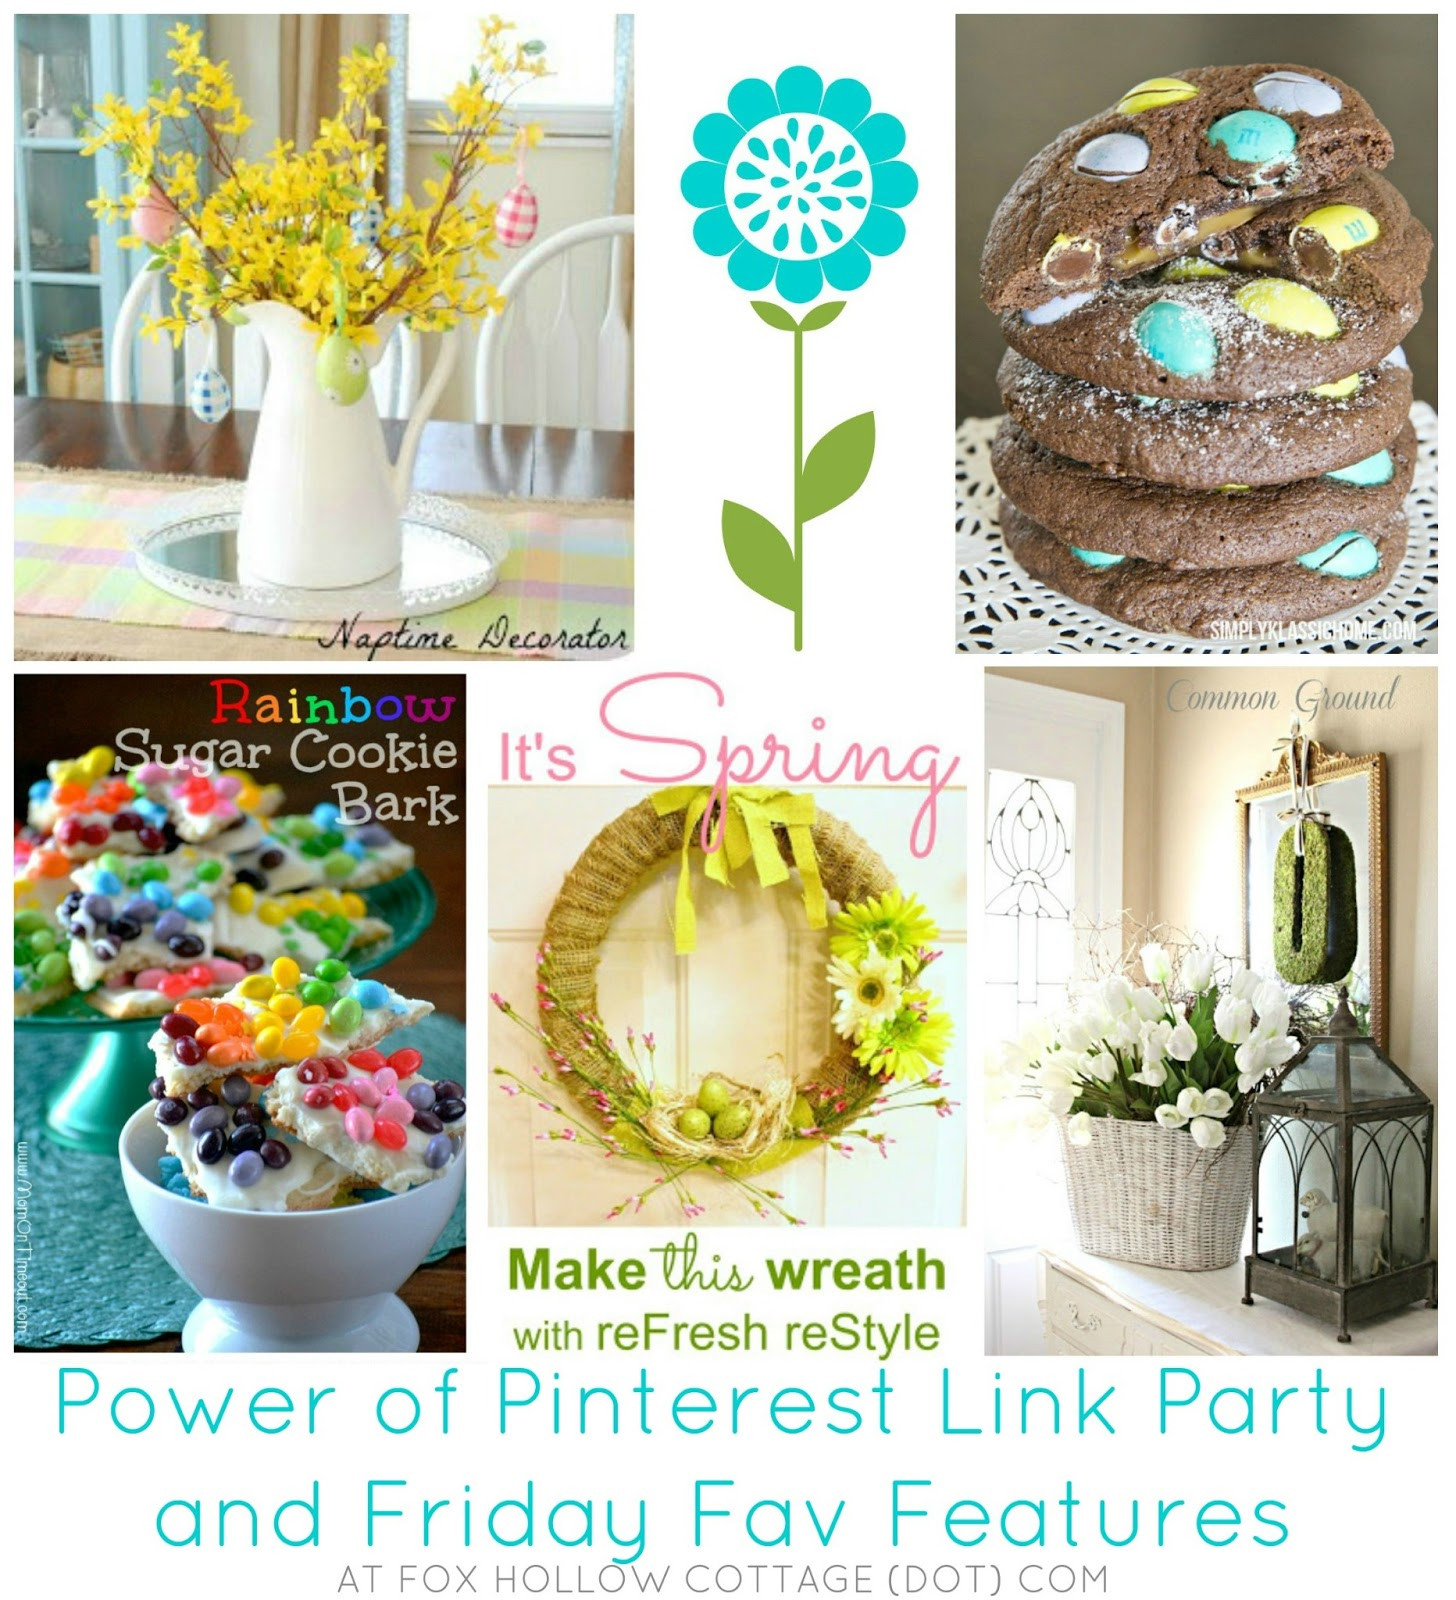 Pinterest DIY Crafts Home Decor
 Power of Pinterest Link Party and Friday Fav Features